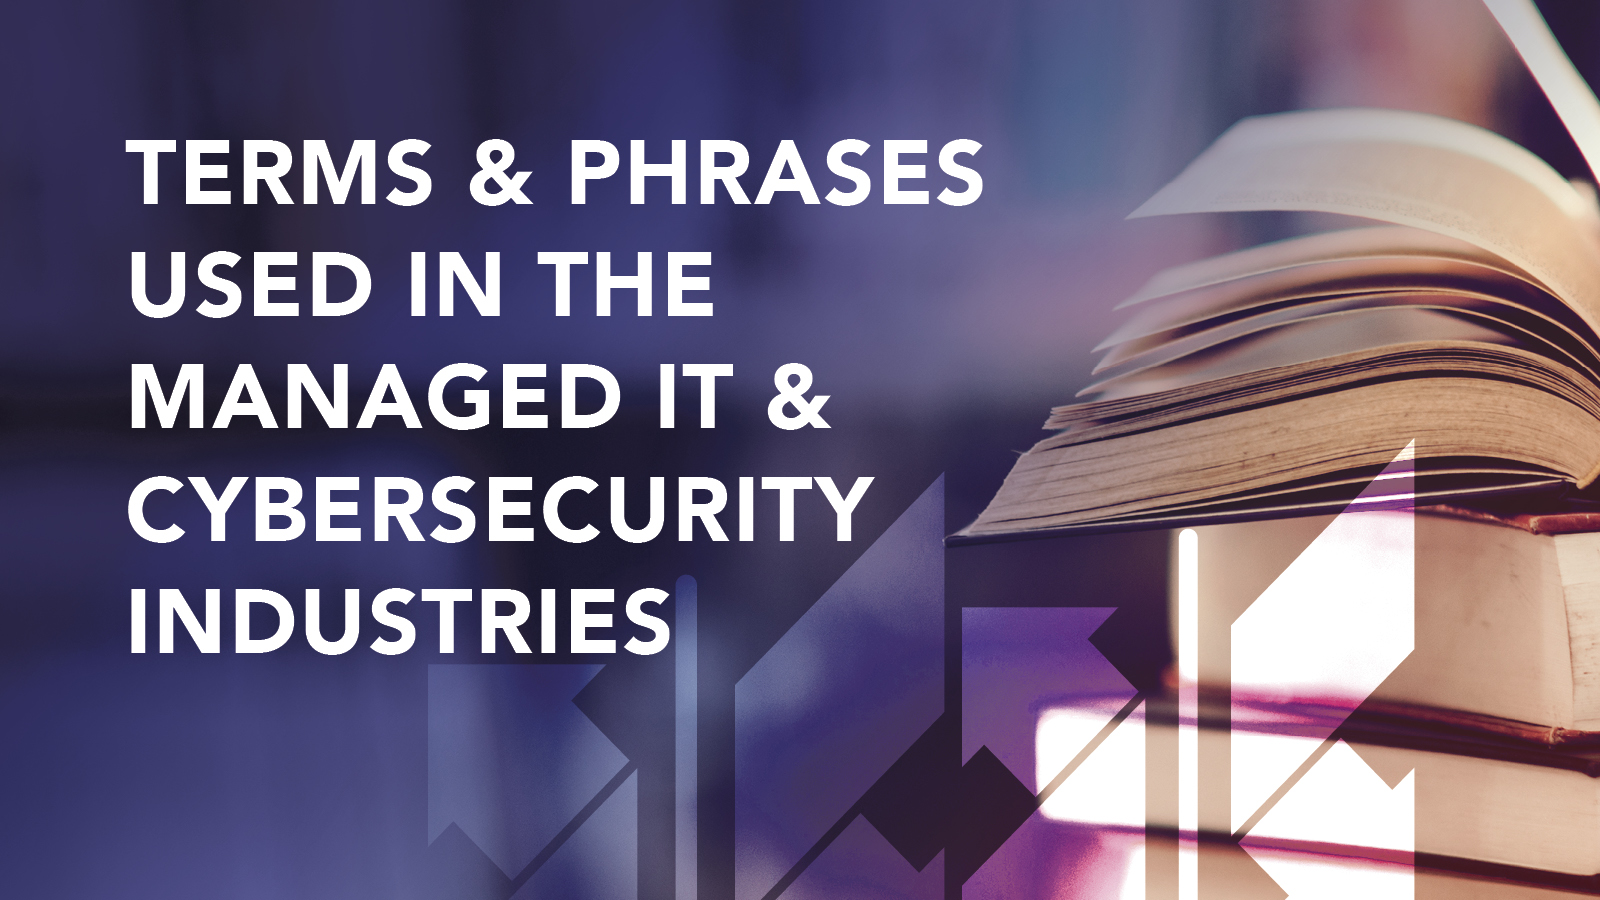 Terms & Phrases Used in the Managed IT & Cybersecurity Industries